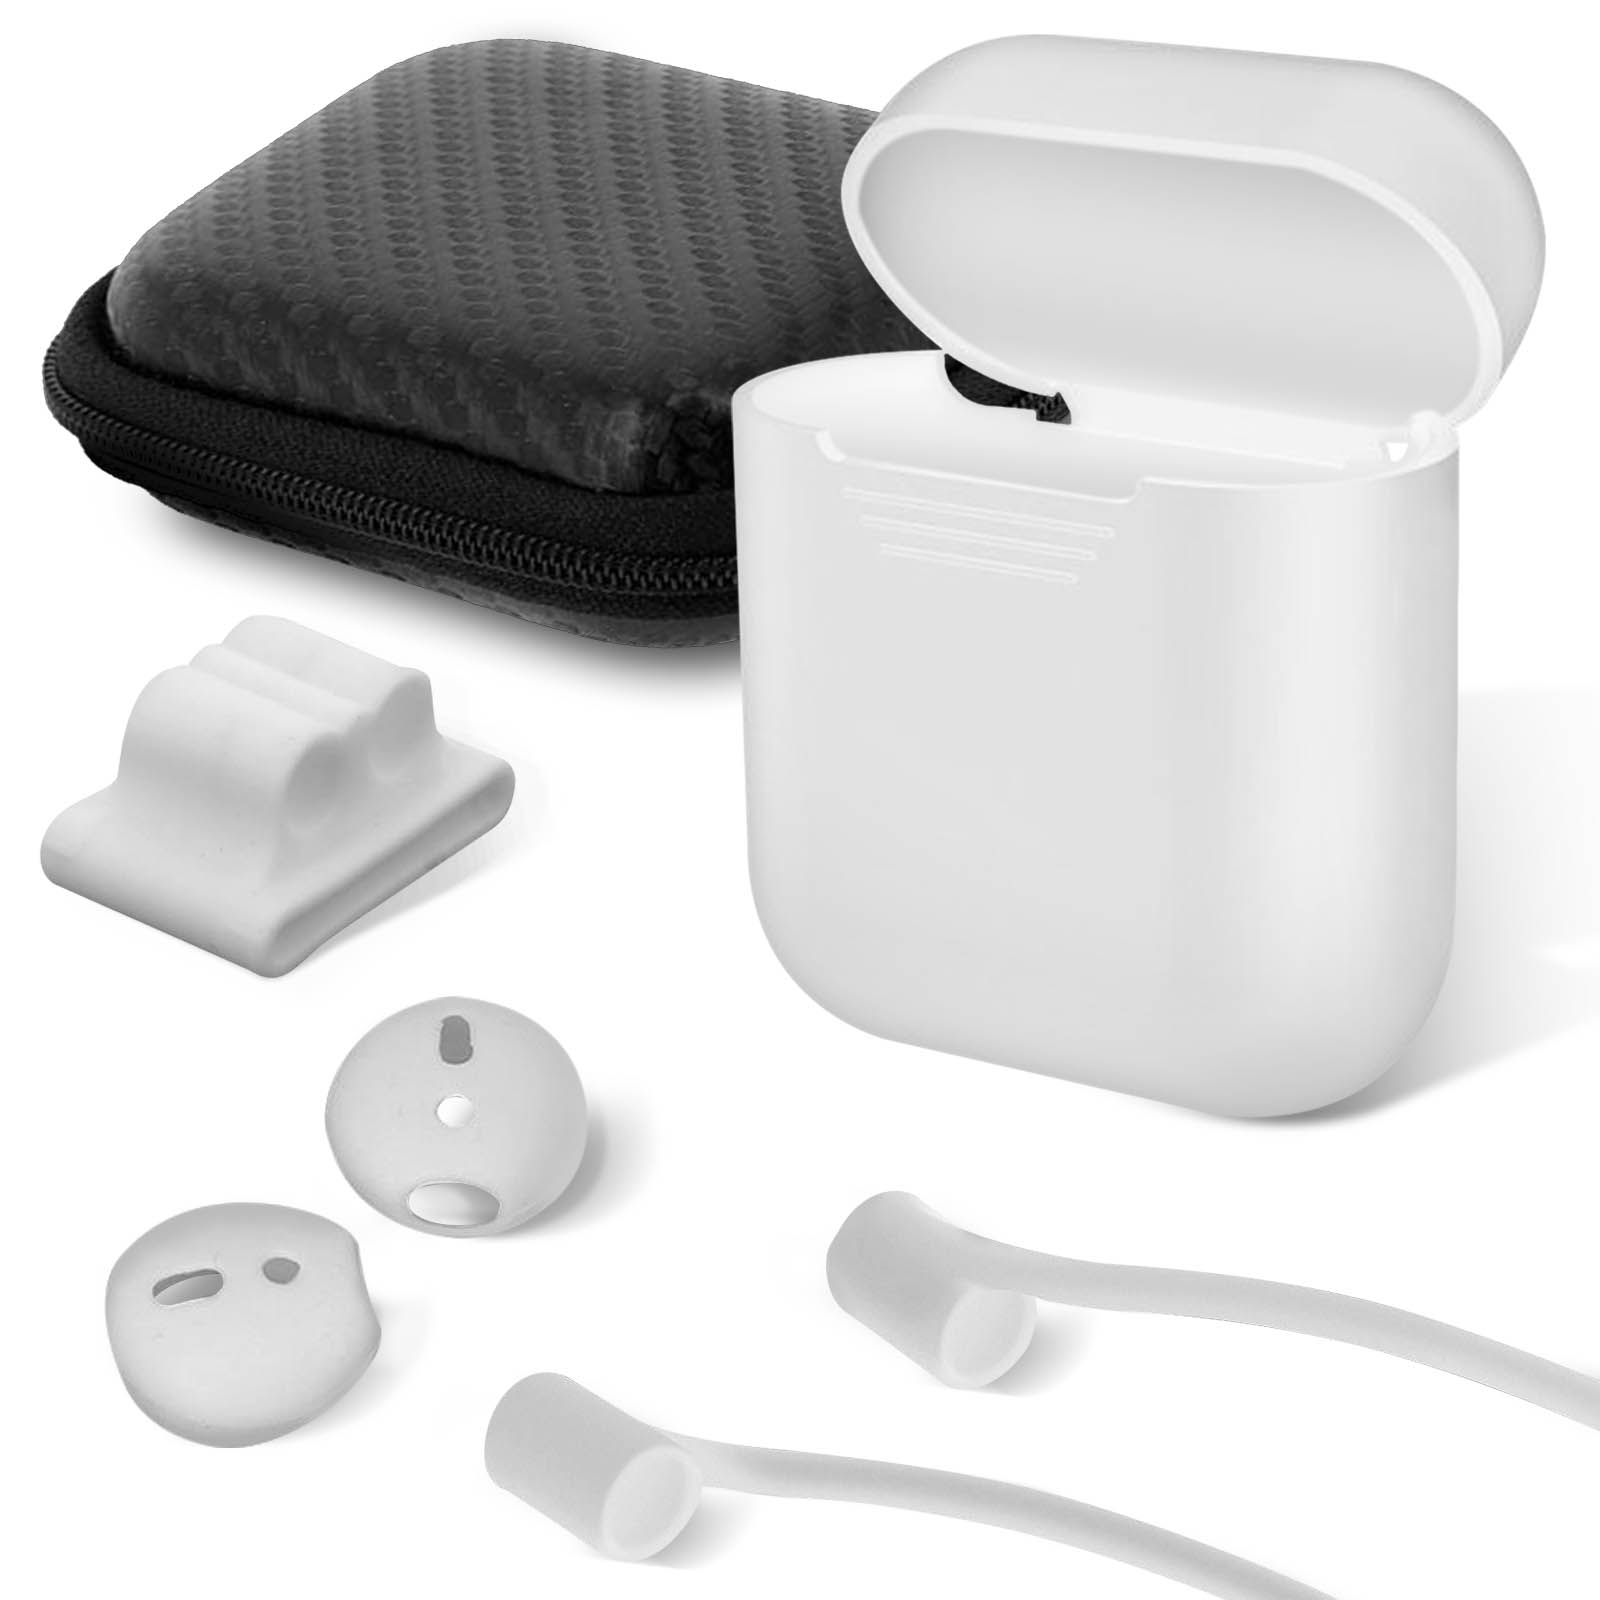 AVIZAR AirPods Weiß AirPods, Full Apple, Tasche, Cover, Schlaufe, Apple Hülle, 5-in-1 Set